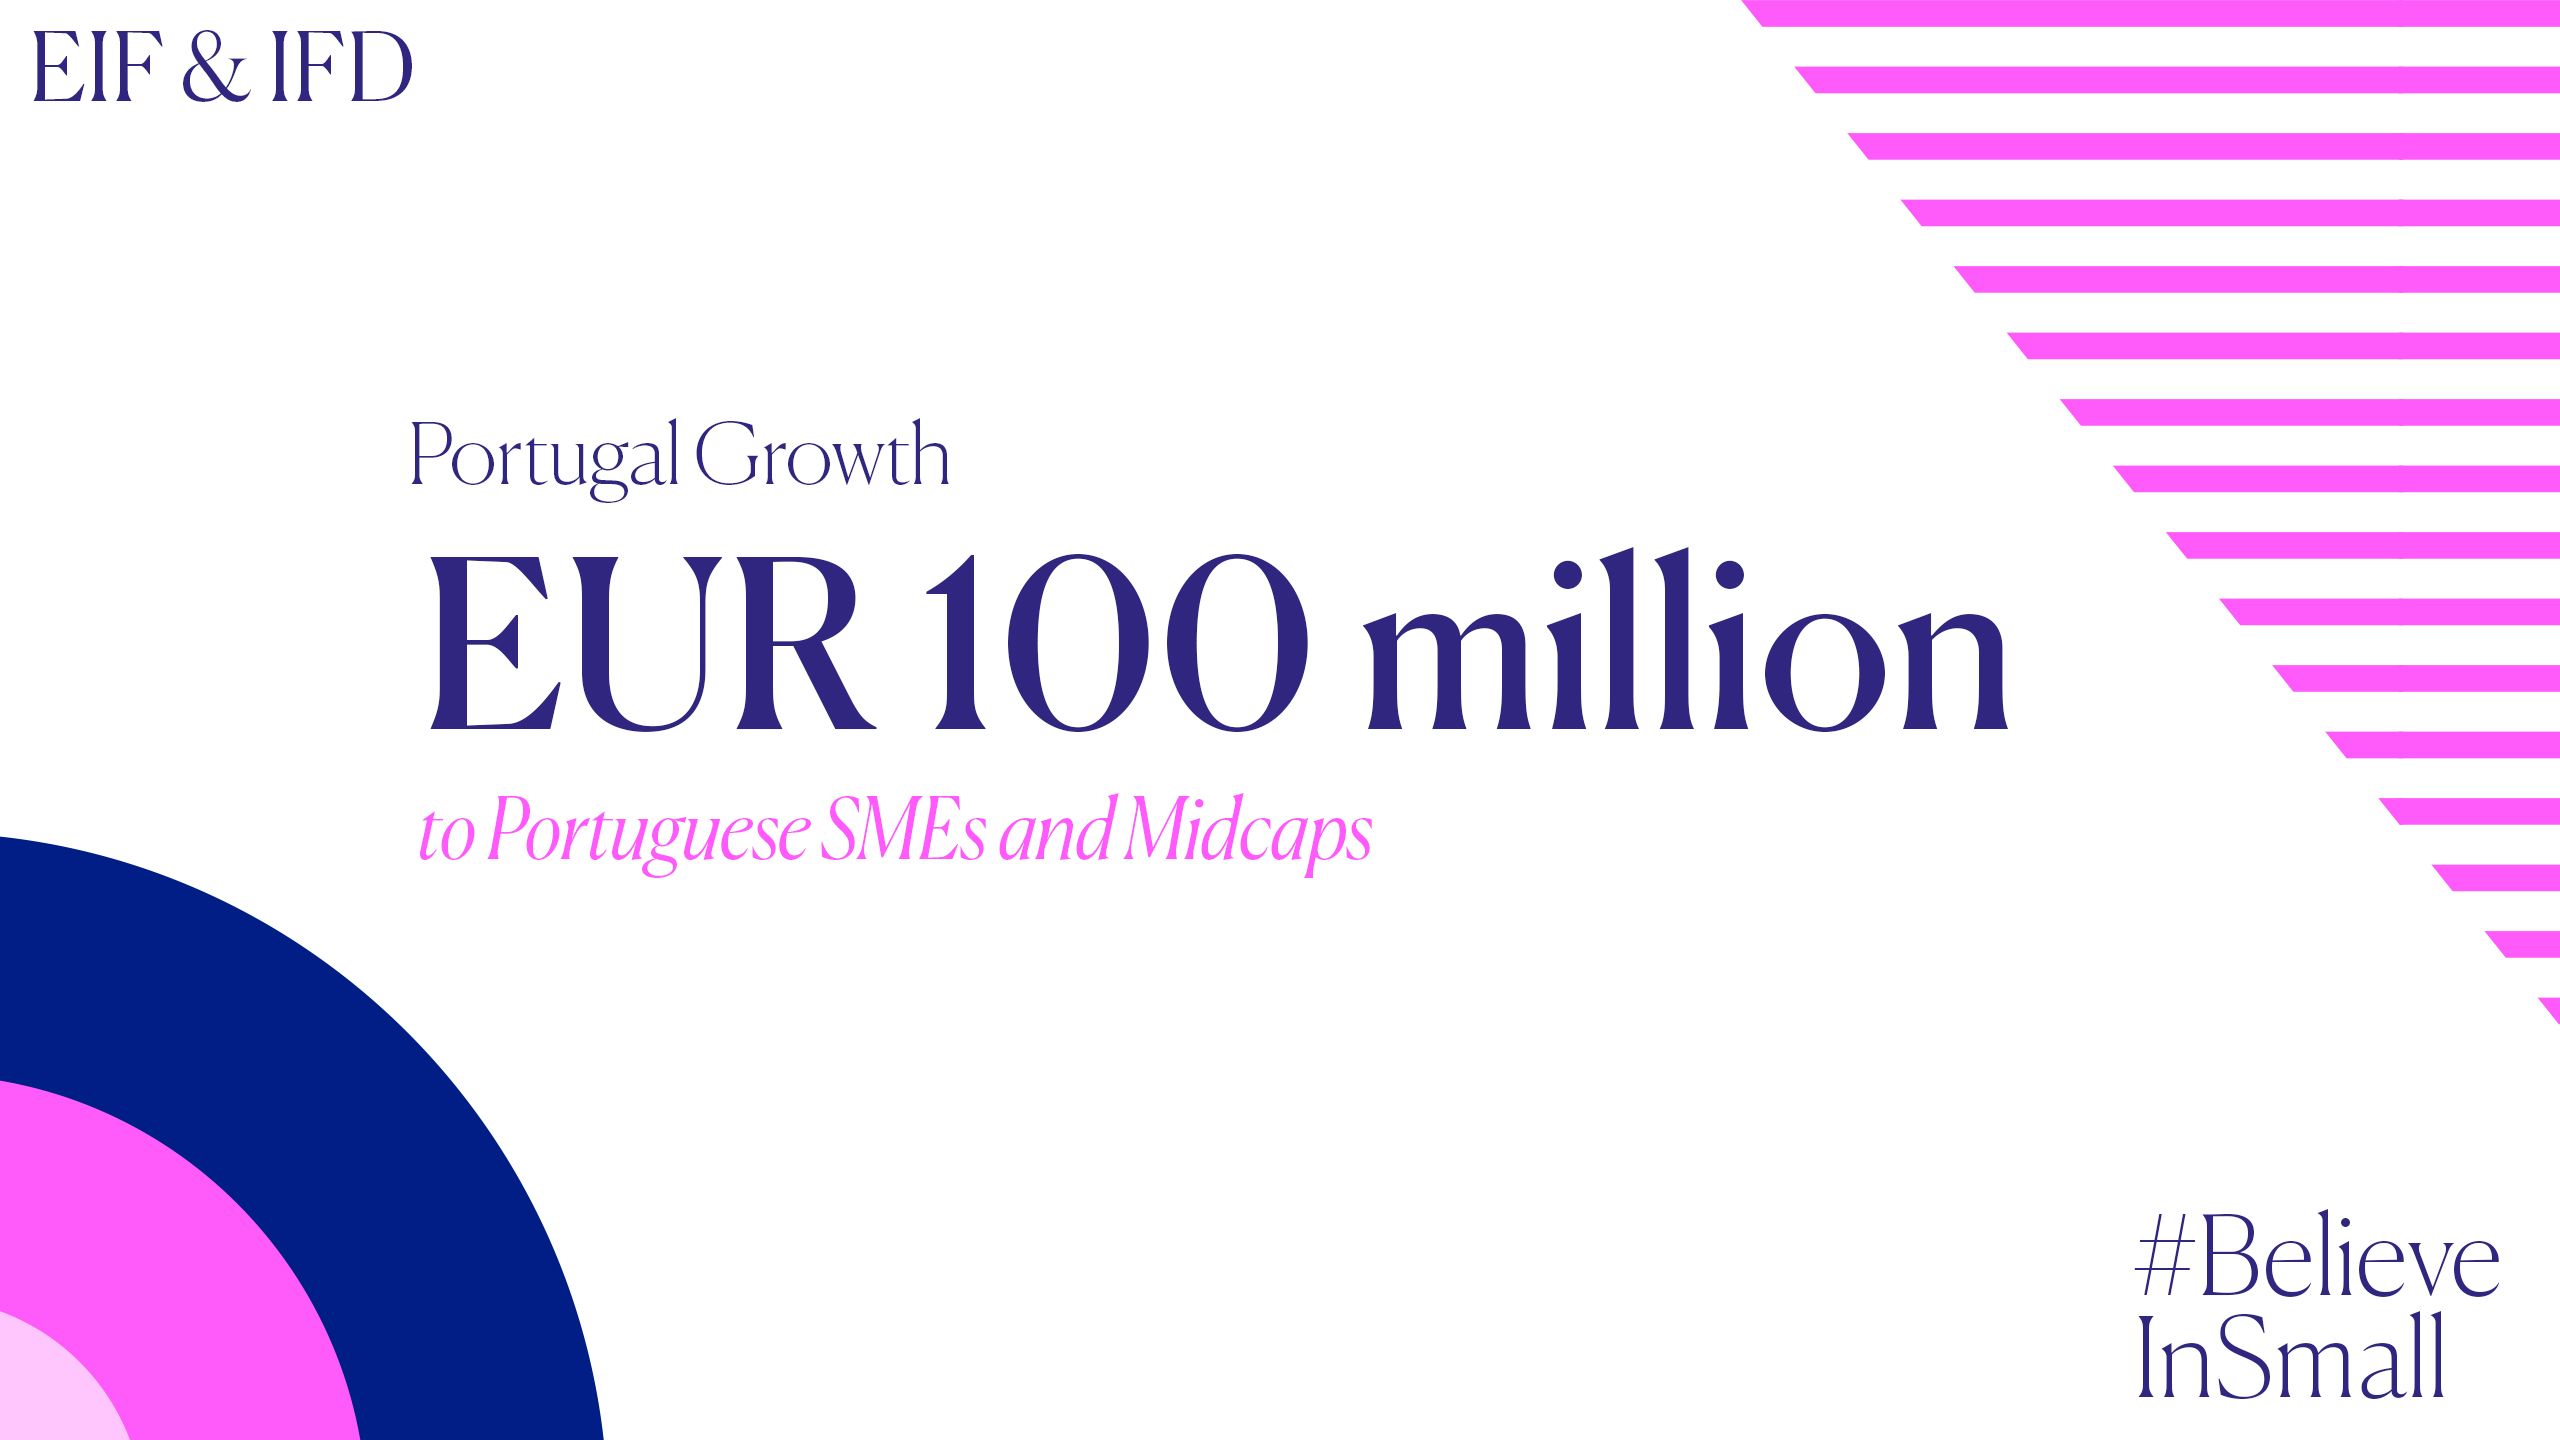 Portugal Growth: 100 million to Portuguese SME's and Midcaps